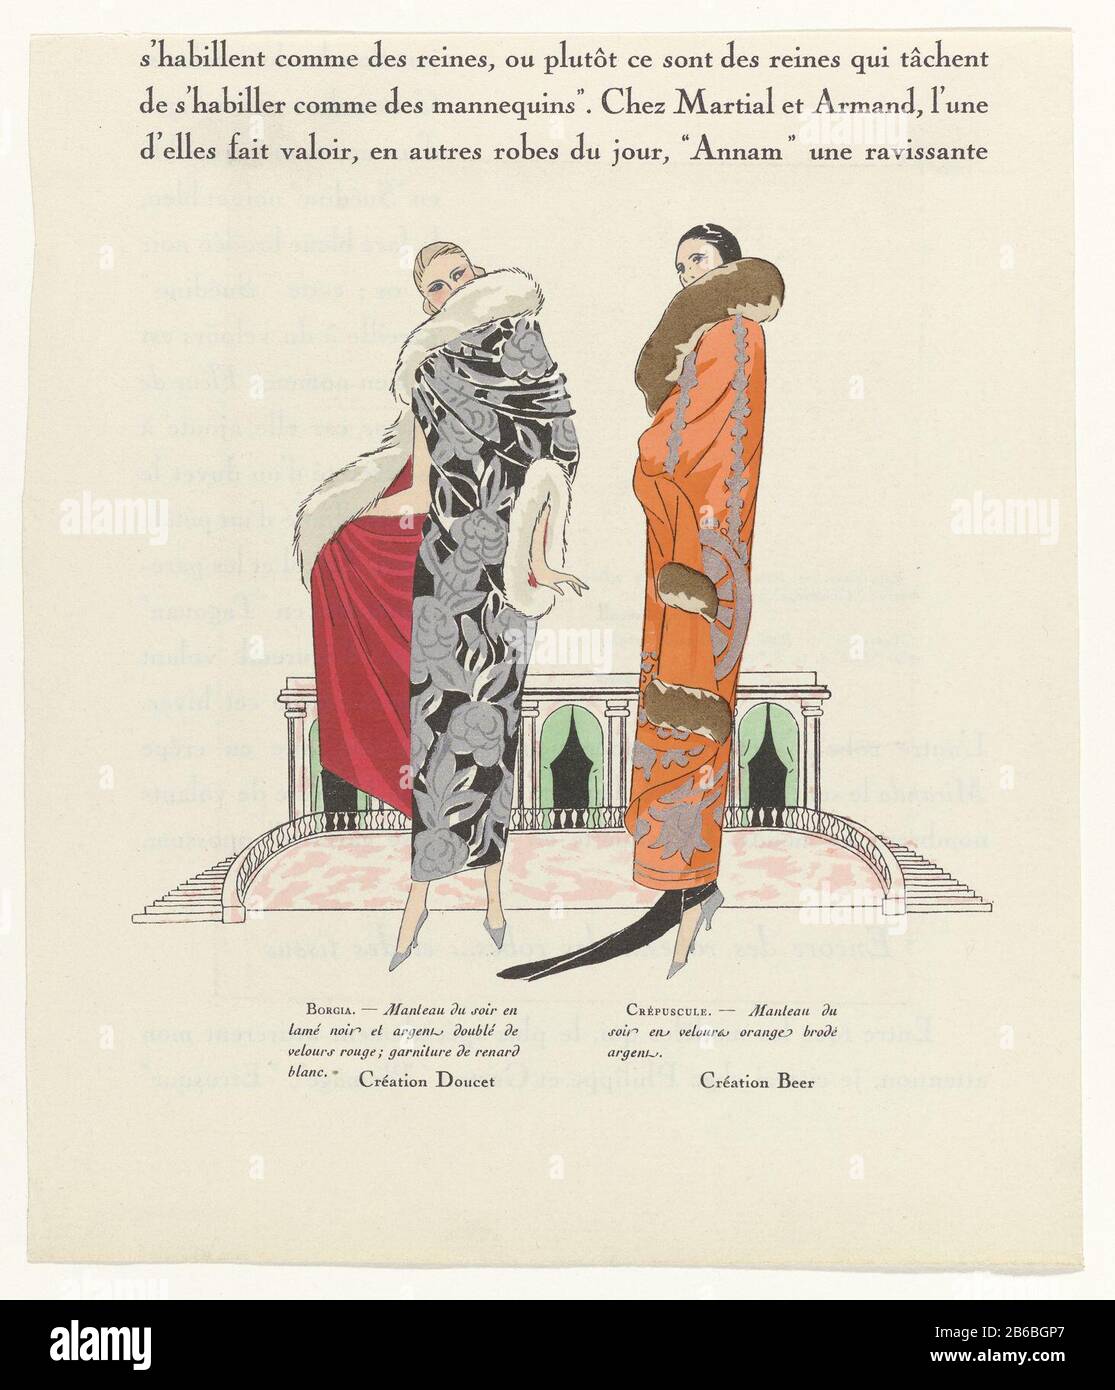 https://c8.alamy.com/comp/2B6BGP7/two-women-in-evening-coats-of-doucet-and-bear-both-with-large-fur-collars-print-where-apparently-from-the-fashion-magazine-art-gout-beaut-1920-1933-manufacturer-printmaker-anonymous-fashion-designer-jacques-doucet-listed-building-fashion-designer-gustav-beer-listed-property-date-approx-1924-material-paper-subject-fashion-plates-coat-evening-coat-womens-clothes-coat-evening-coat-fur-used-for-clothes-neck-gear-collar-fur-used-for-clothes-when-1924-1924-2B6BGP7.jpg